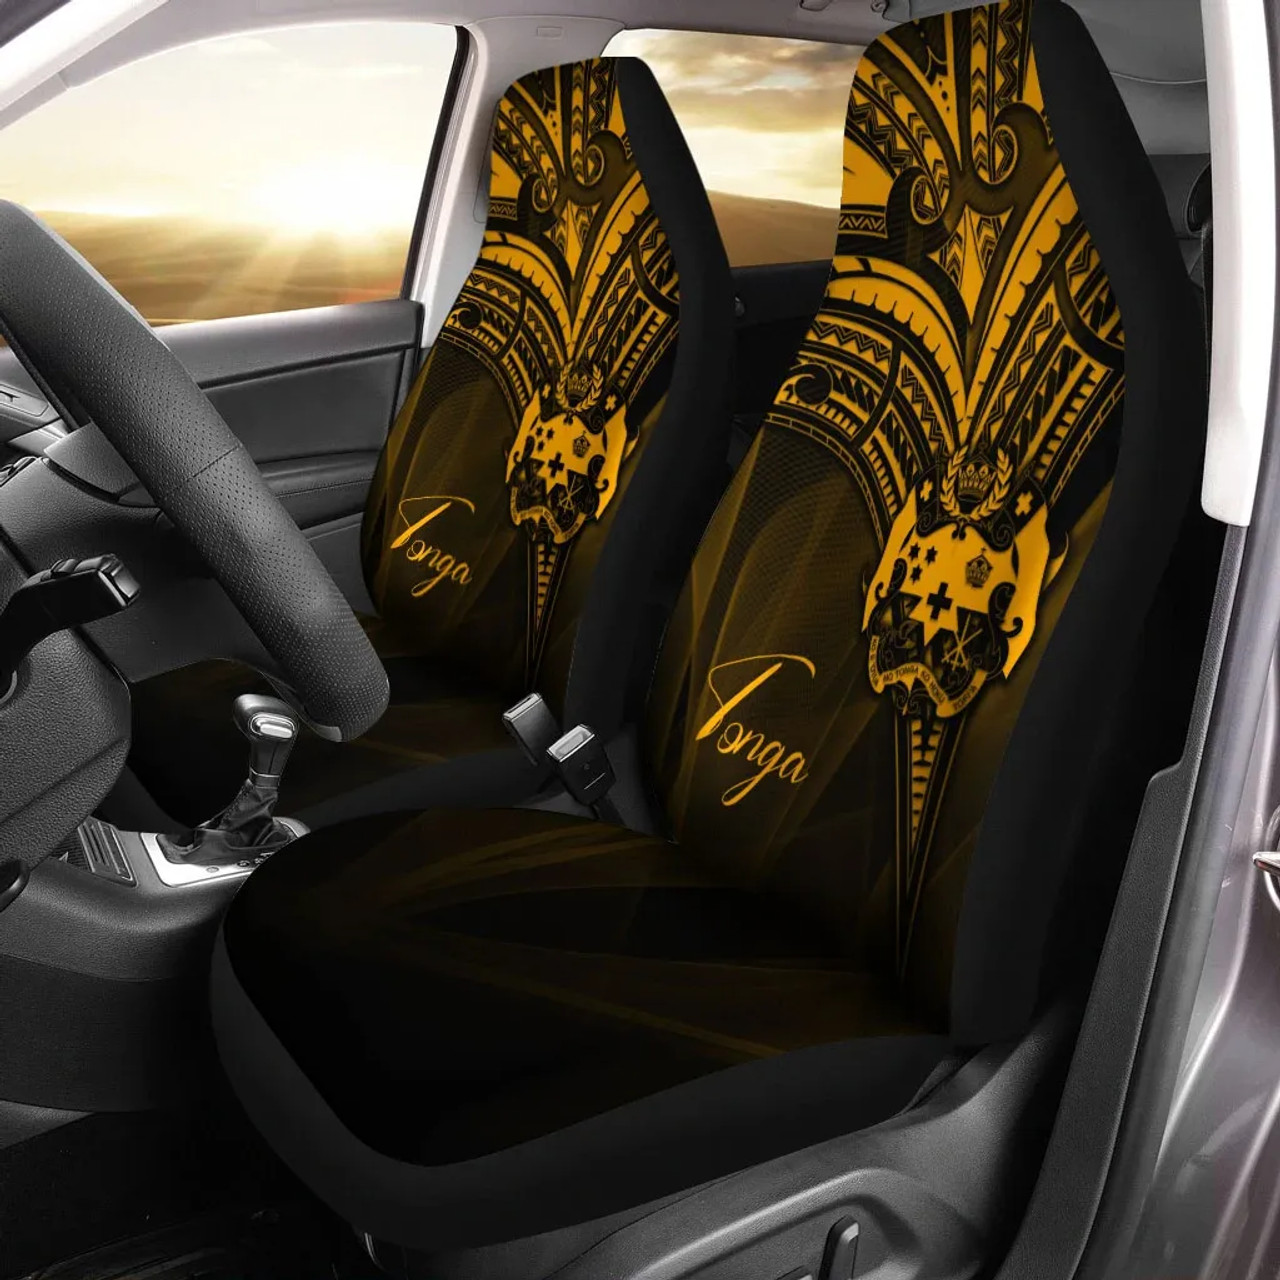 Tonga Car Seat Cover - Gold Color Cross Style